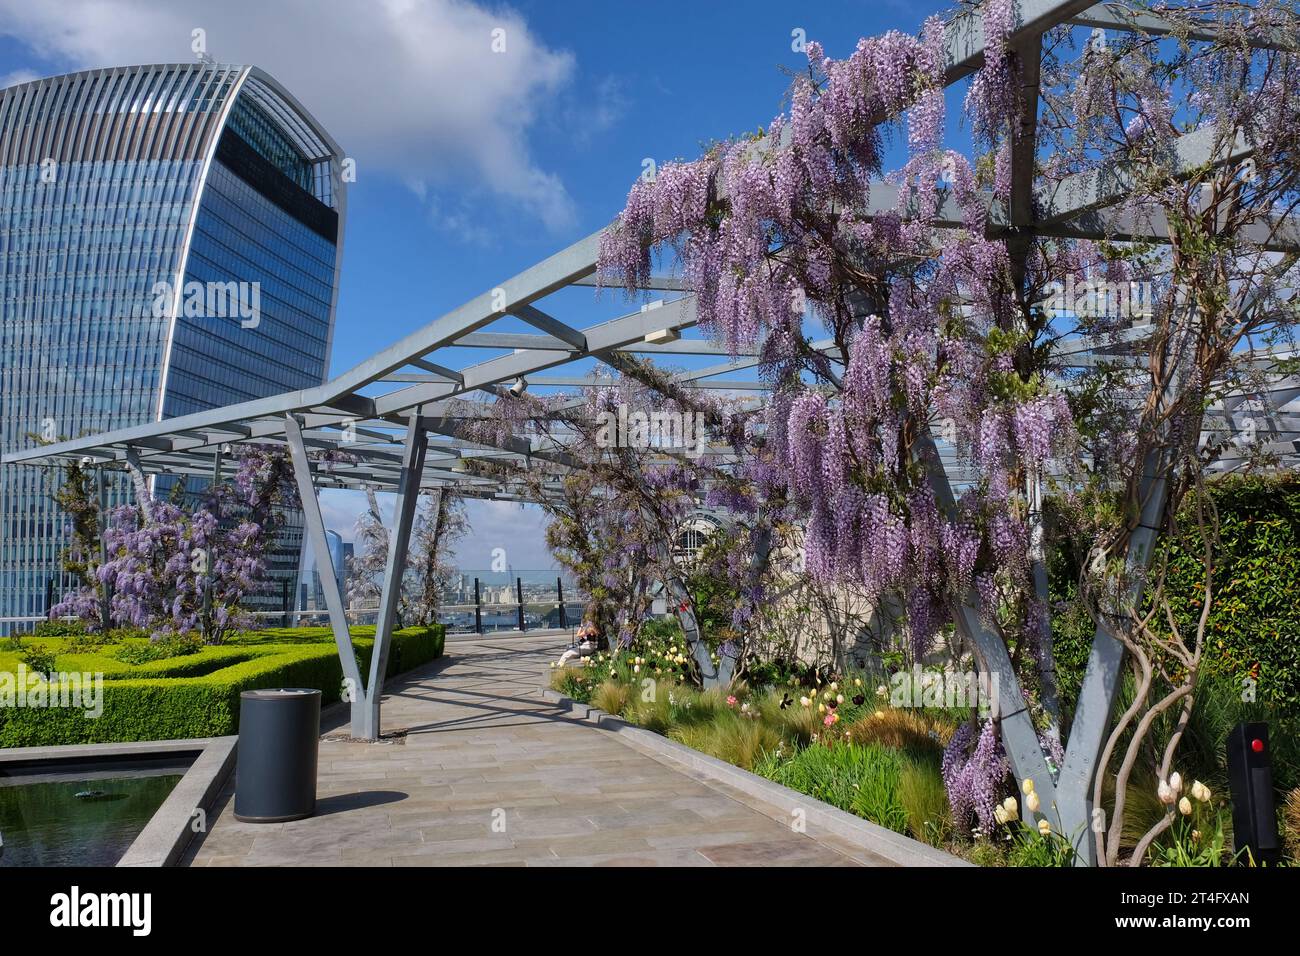 London: Wisteria in bloom on Roof Garden at 120 Fenchurch Street with Walkie Talkie building in City of London, England, UK Stock Photo